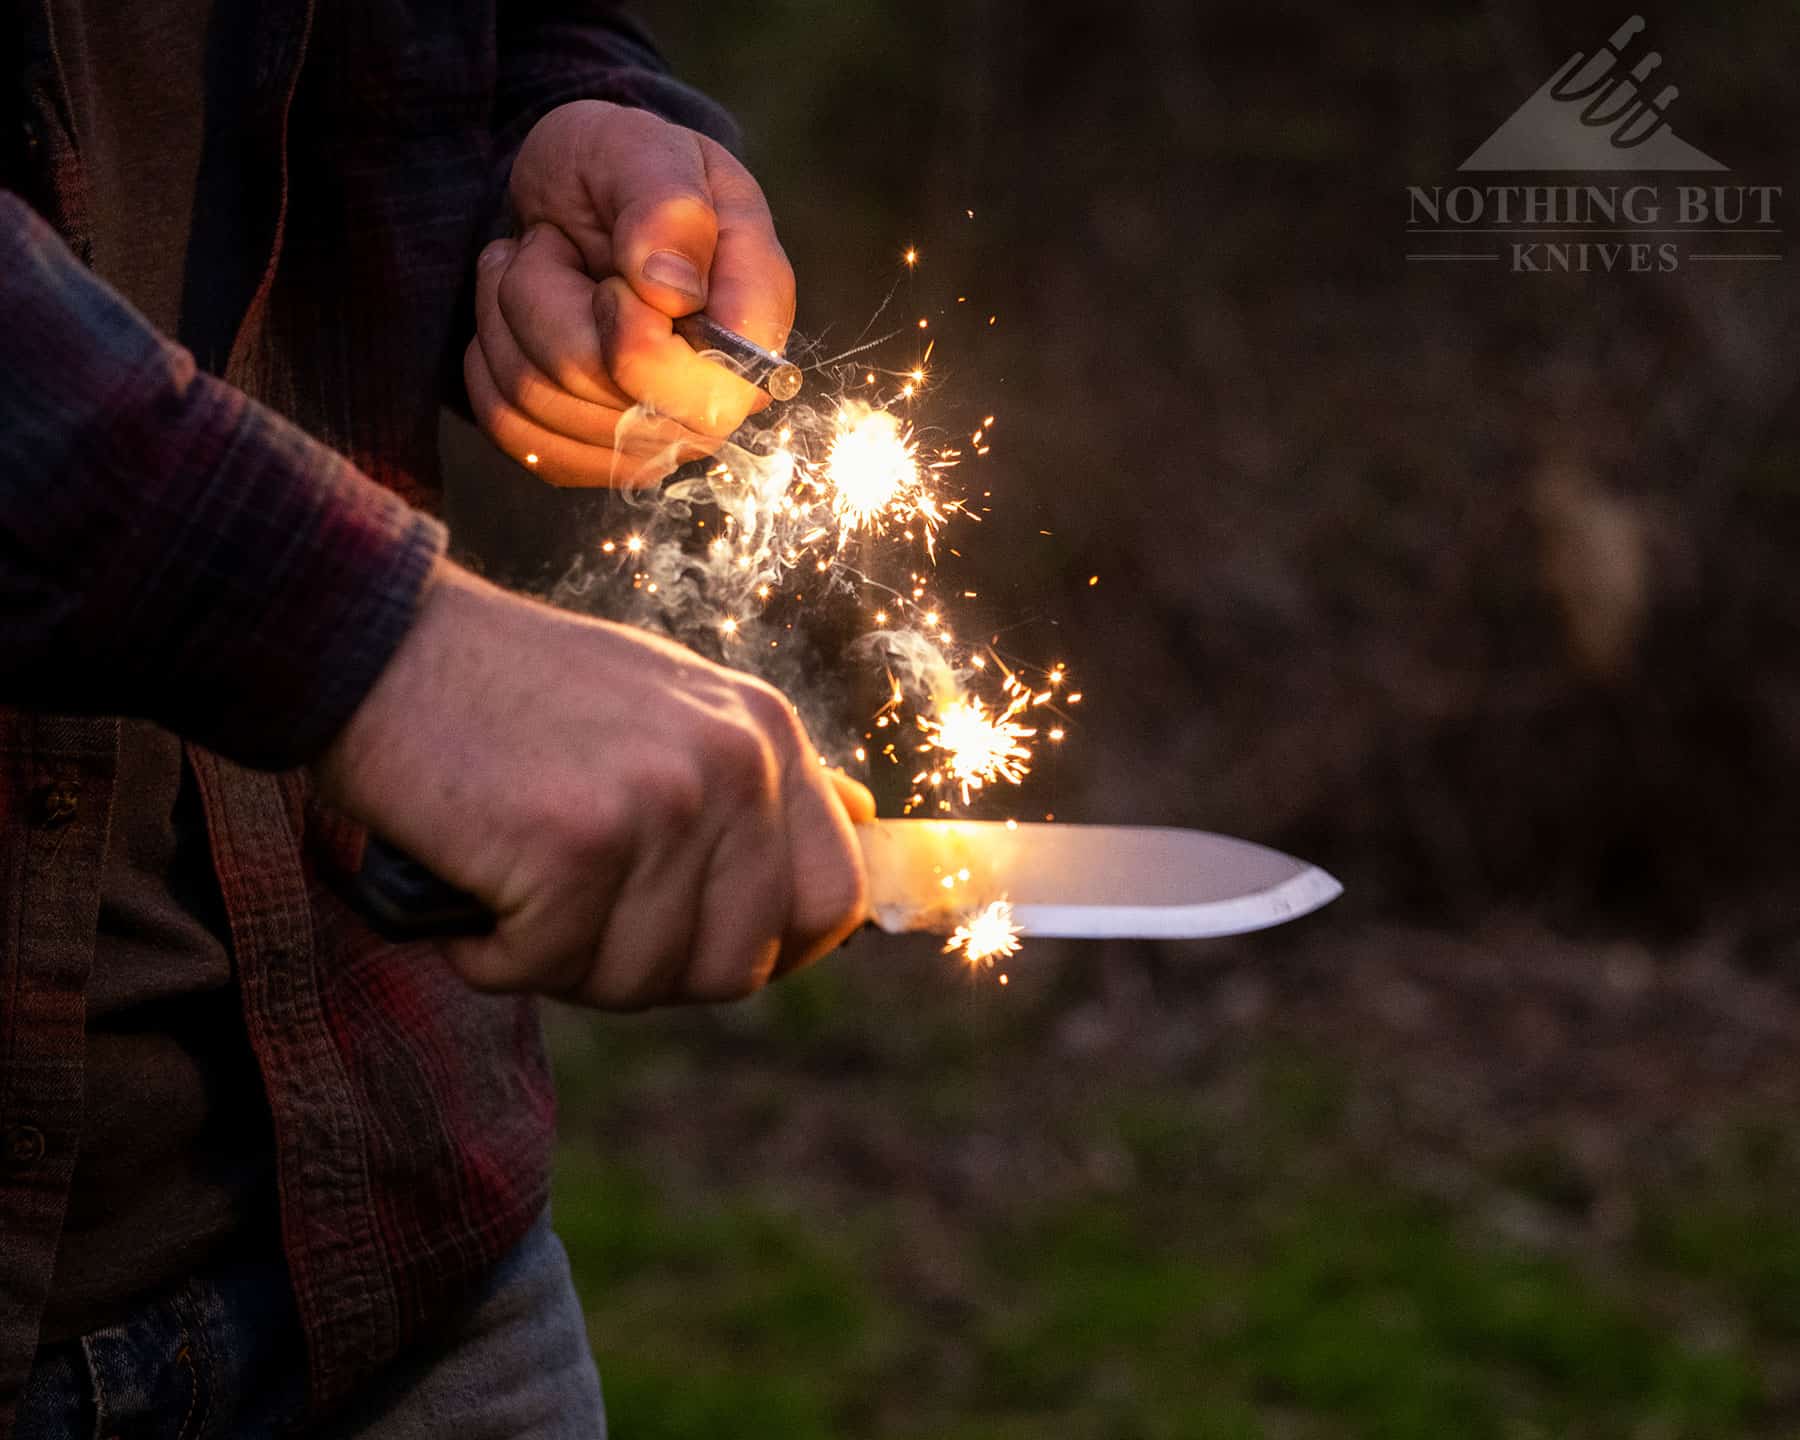 Throwing spark with a ferro rod and the Off-Grid Ridgeback bushcraft knife.